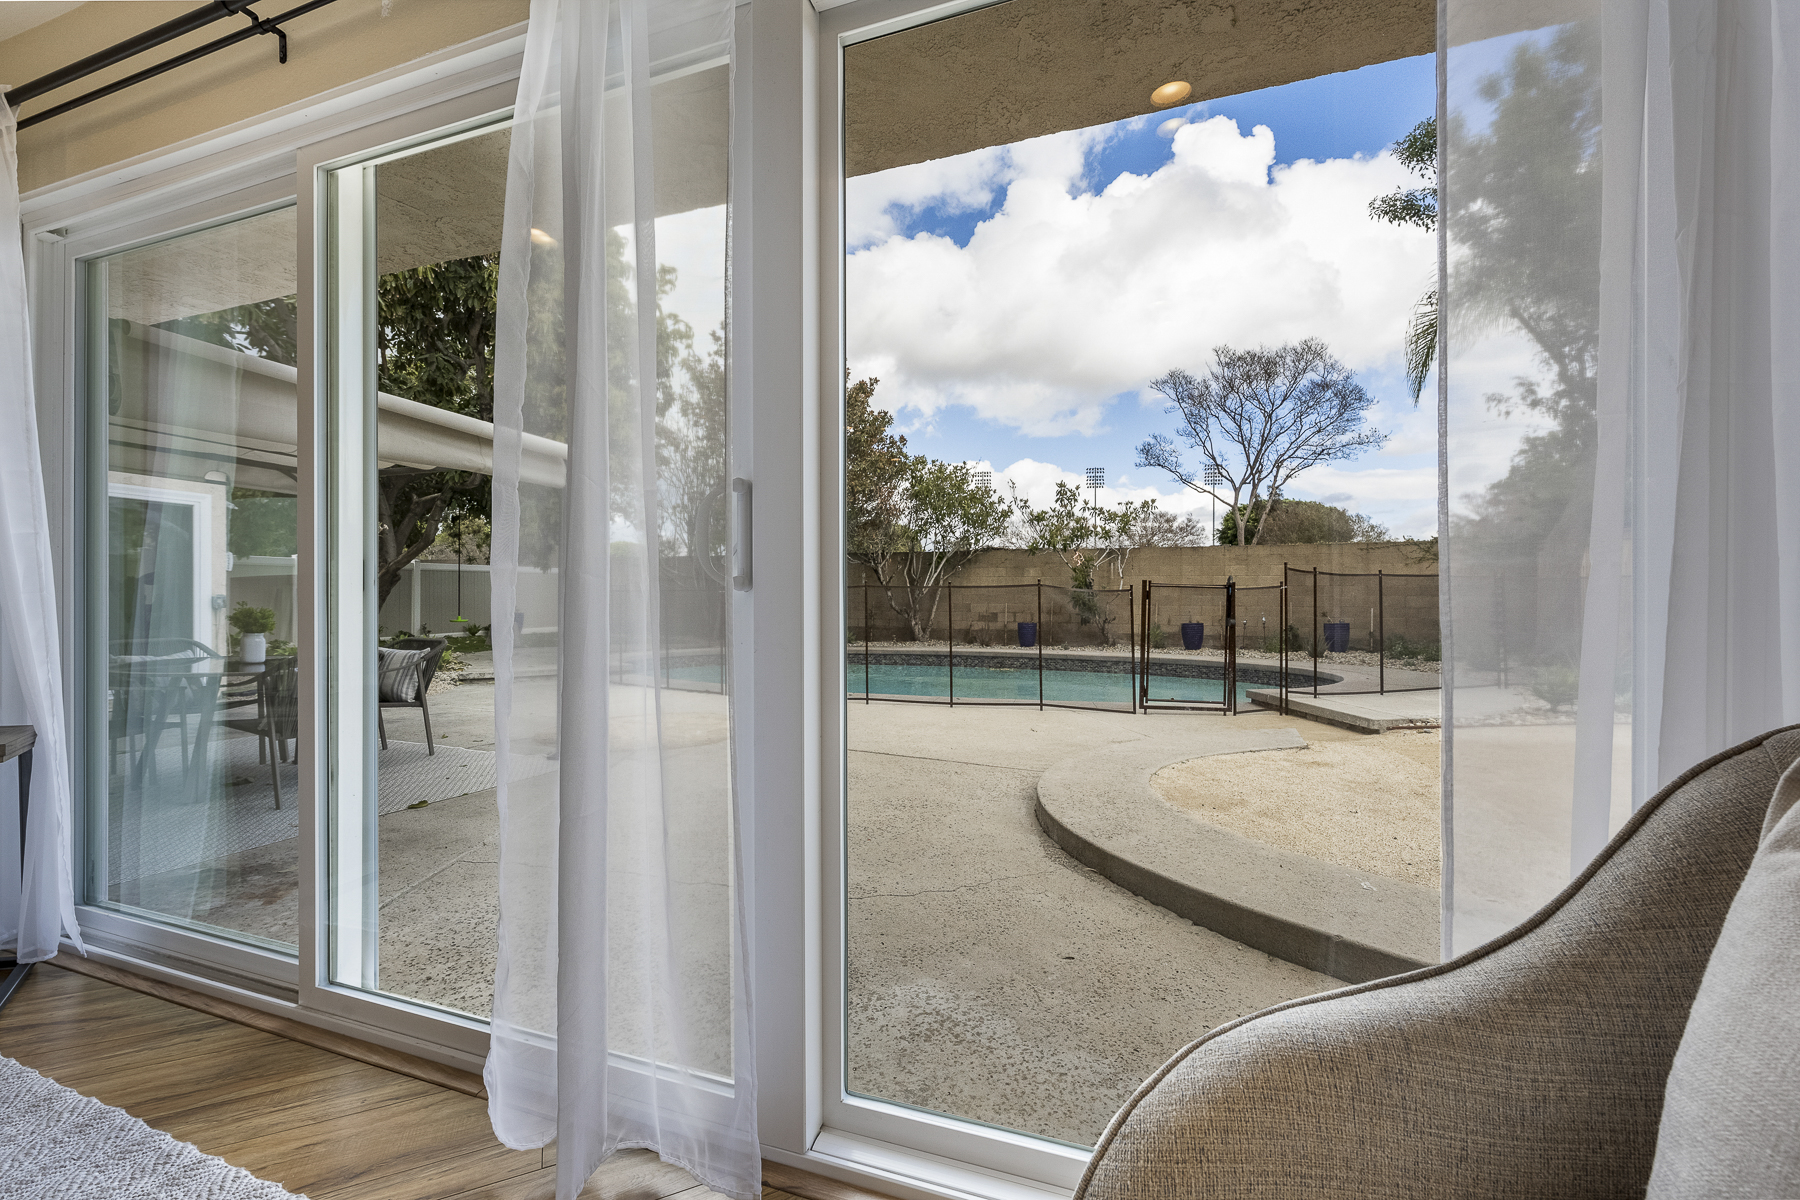 Glass sliding door and windows with view of backyard, including pool and the surrounding gate